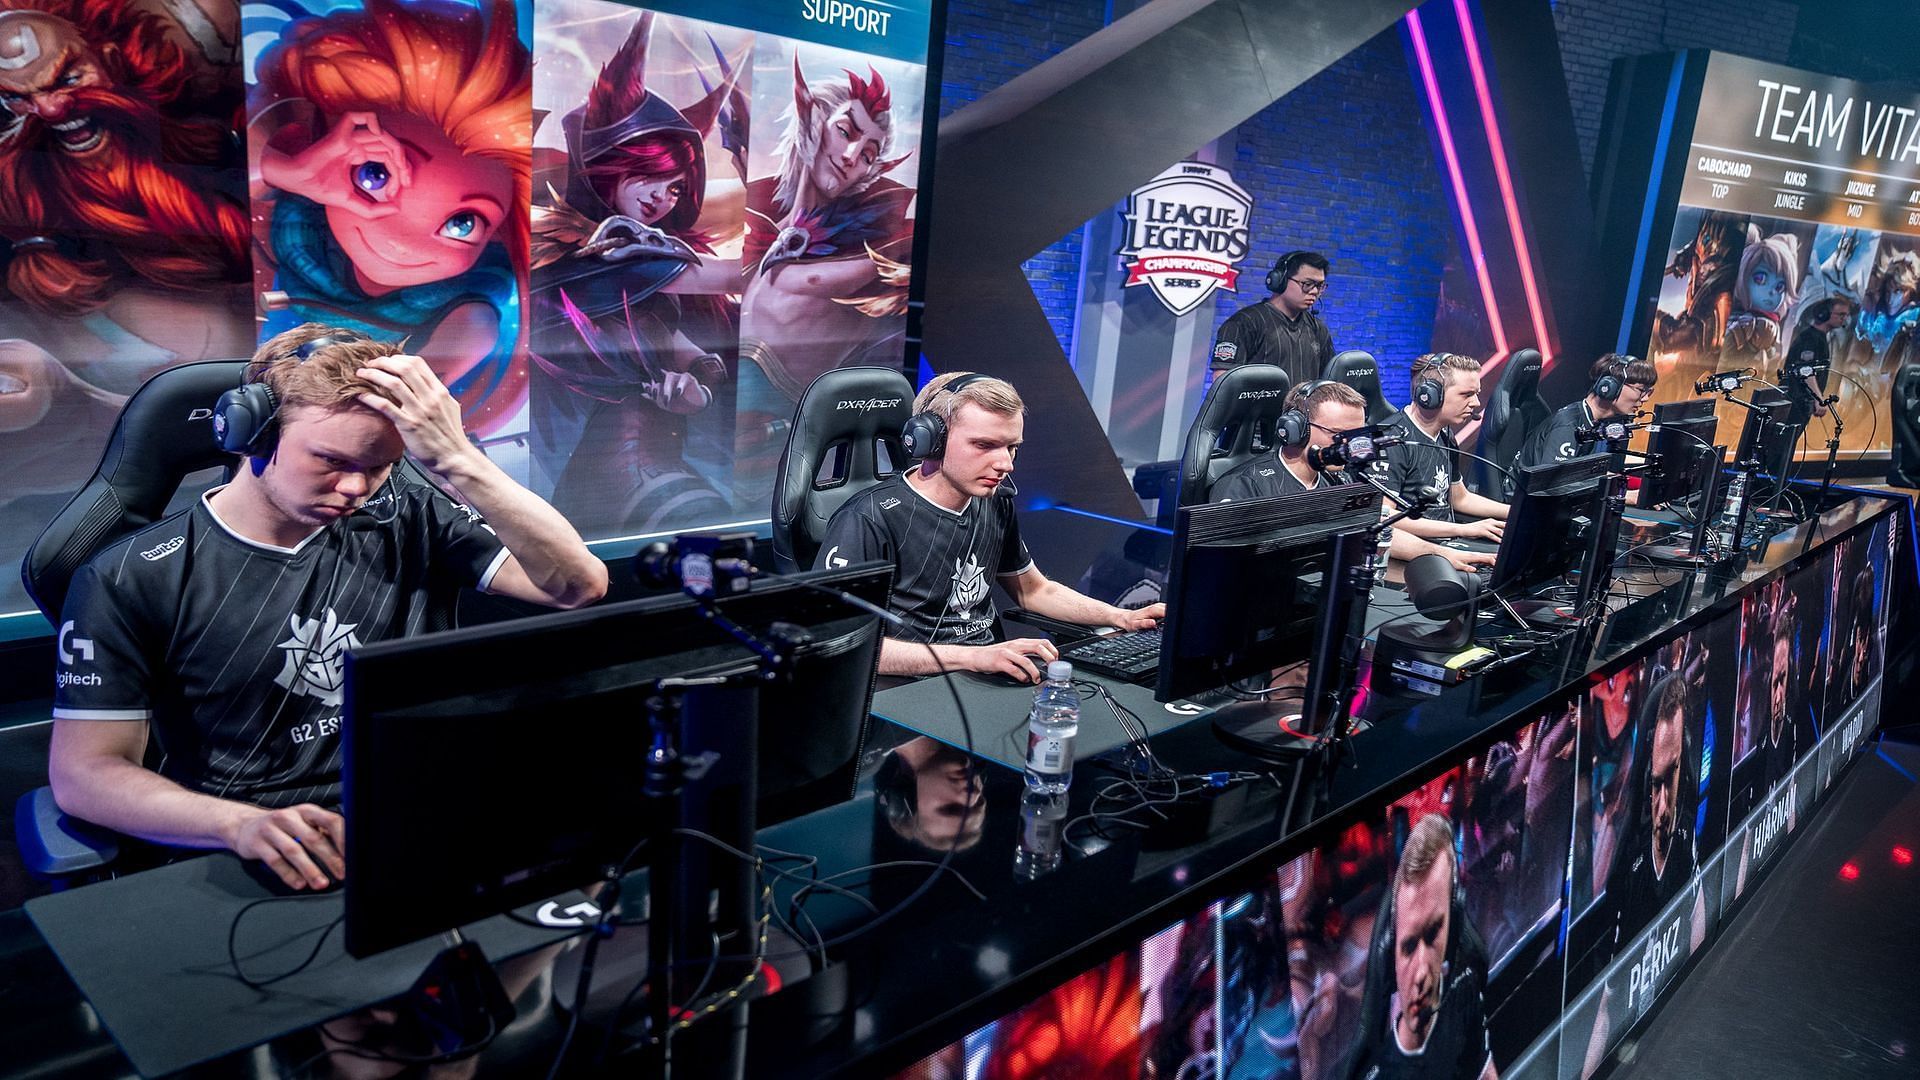 Action from the League of Legends Championship event (Image via Riot Games)